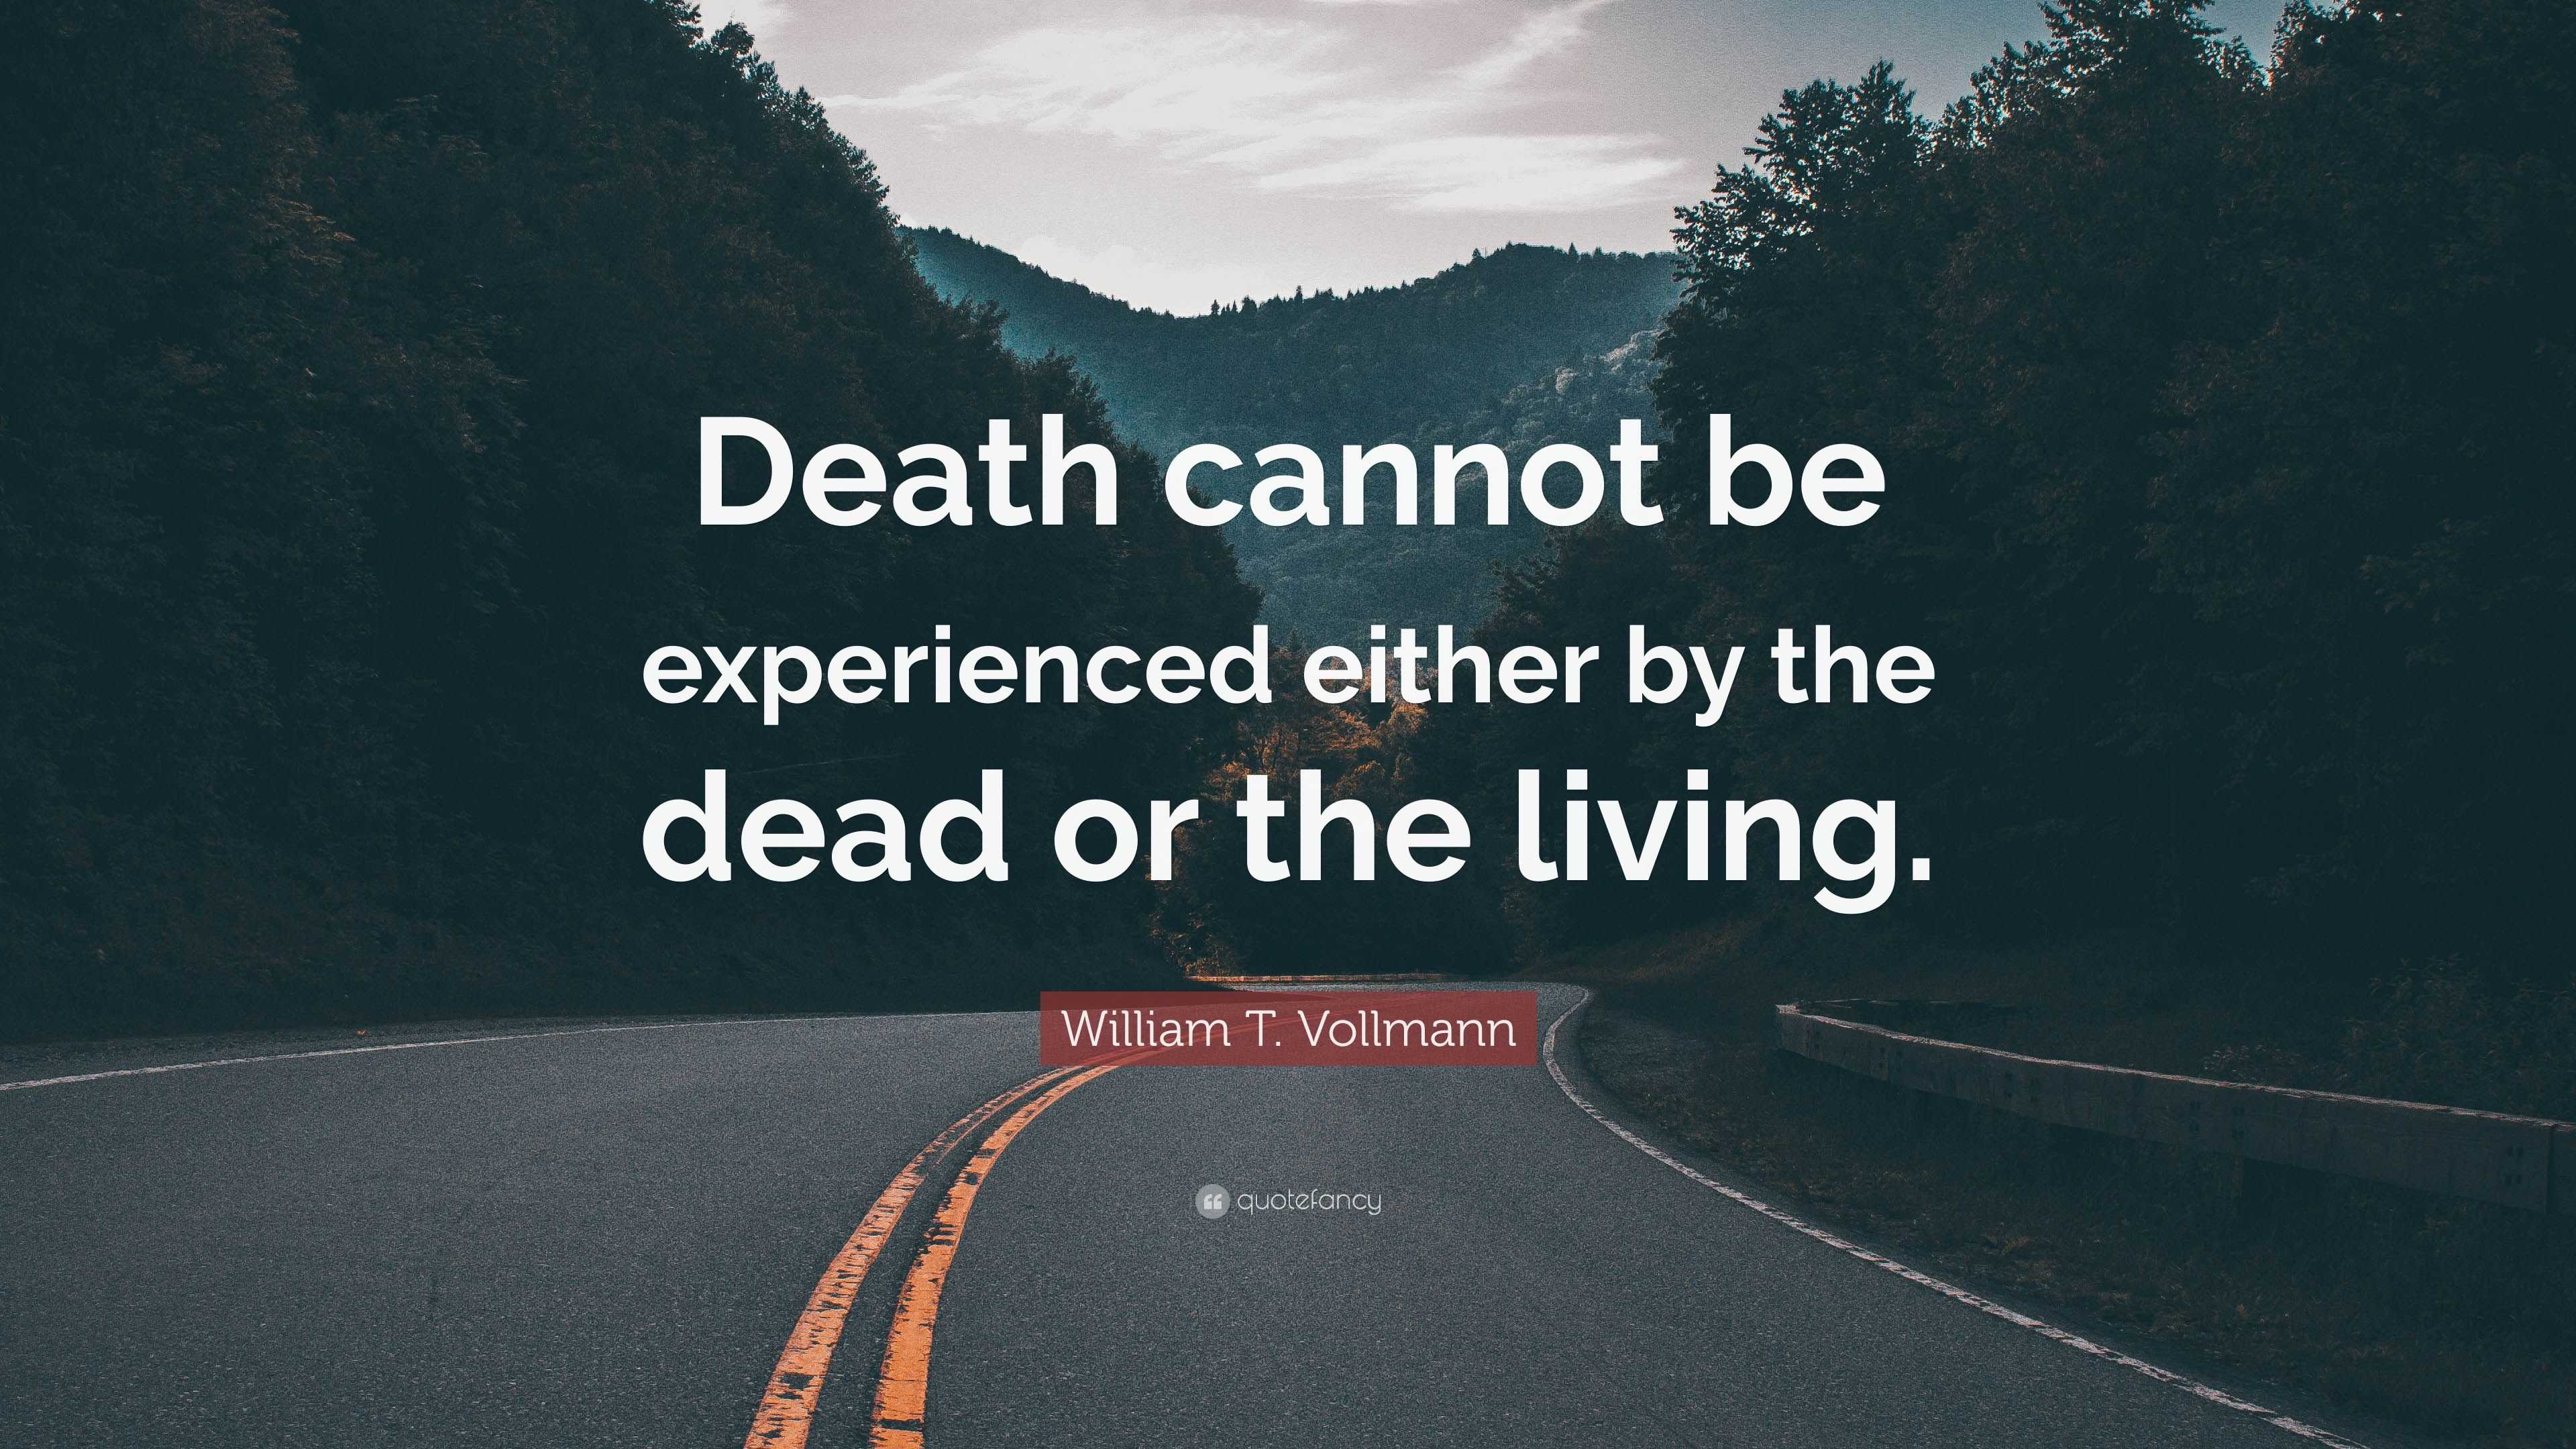 William T. Vollmann Quote: “Death cannot be experienced either by the ...